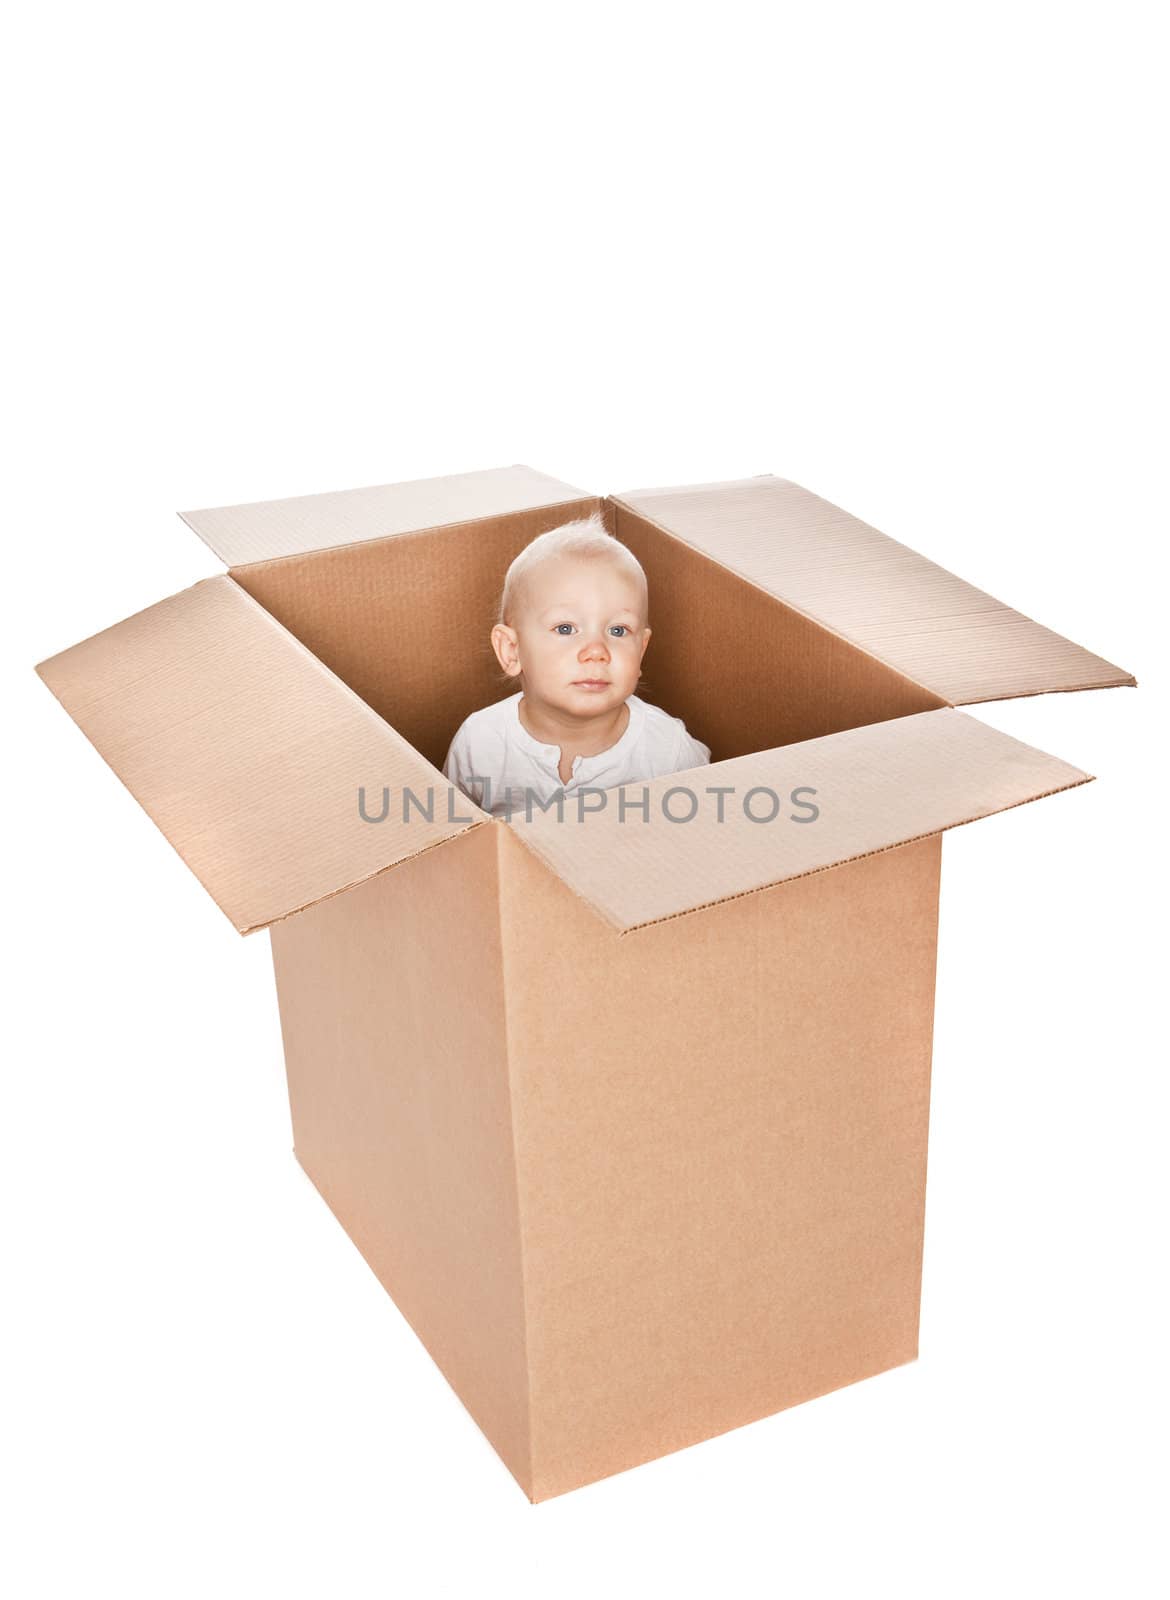 Baby boy in a box isolated against a white background